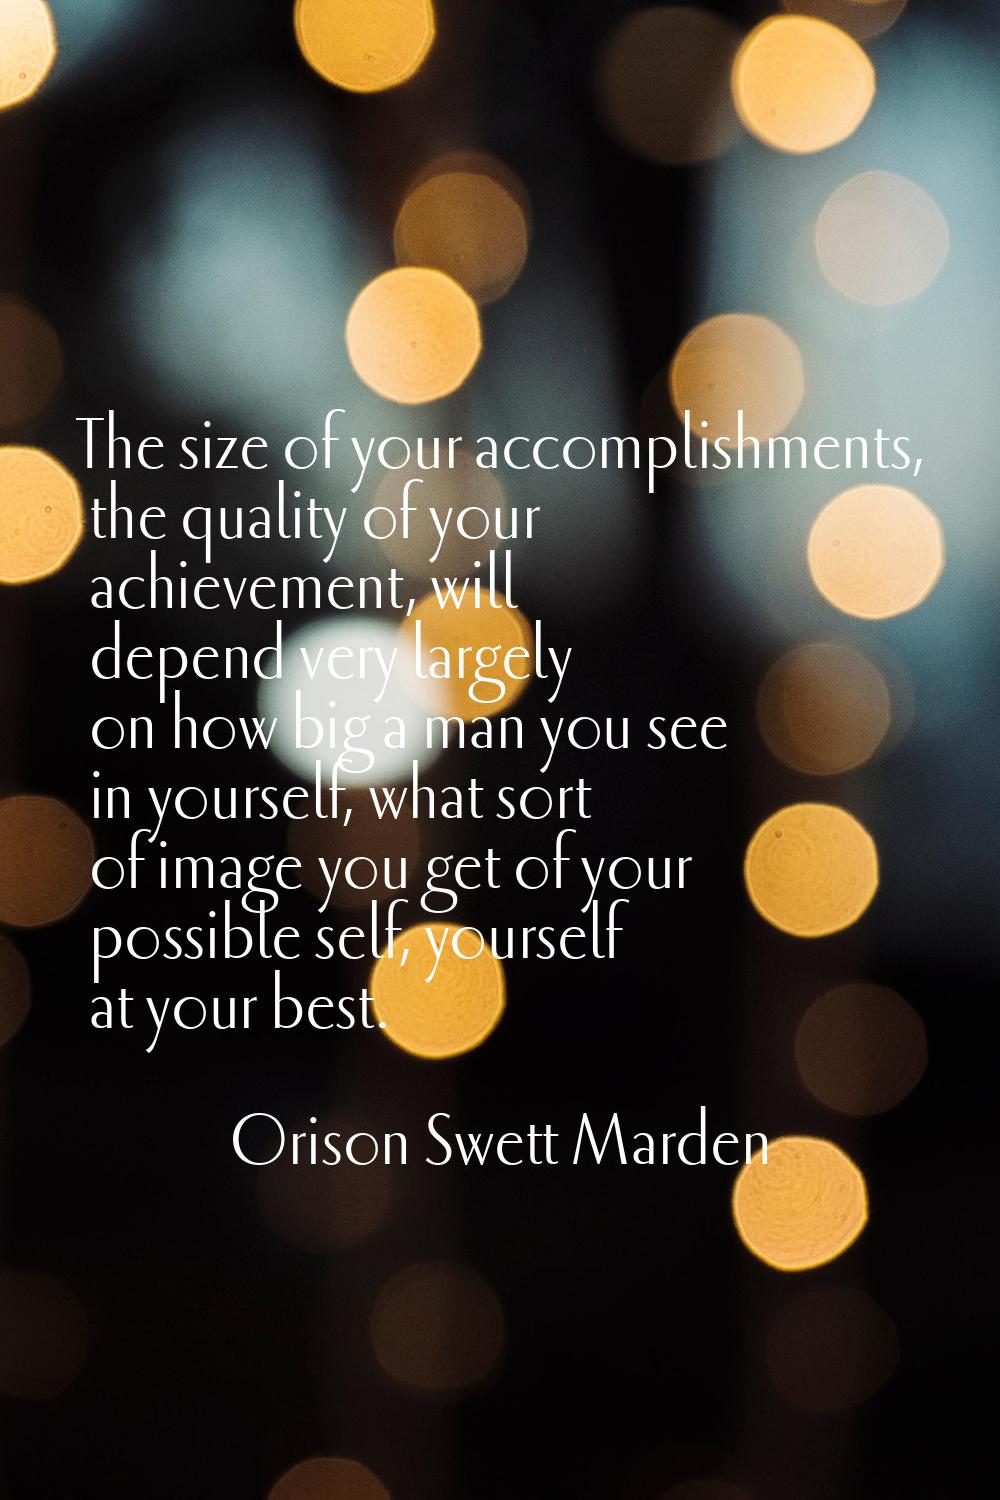 The size of your accomplishments, the quality of your achievement, will depend very largely on how 